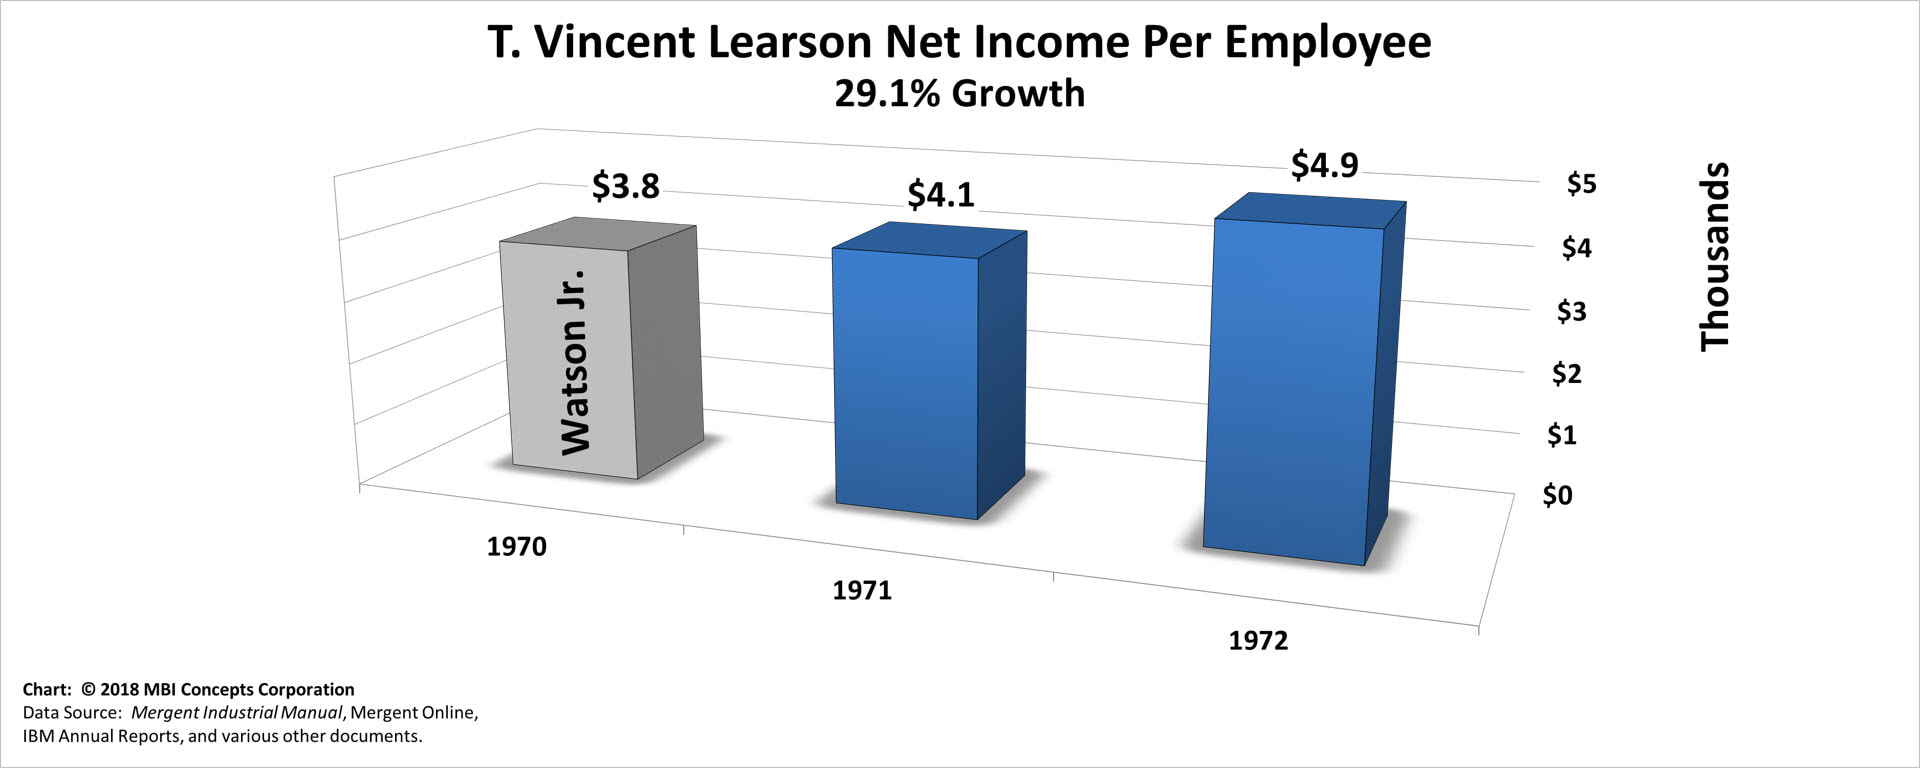 A color bar chart showing IBM's yearly net income (profit) per employee from 1970 to 1973 for IBM Chief Executive Officer T. Vincent (Vin) Learson.